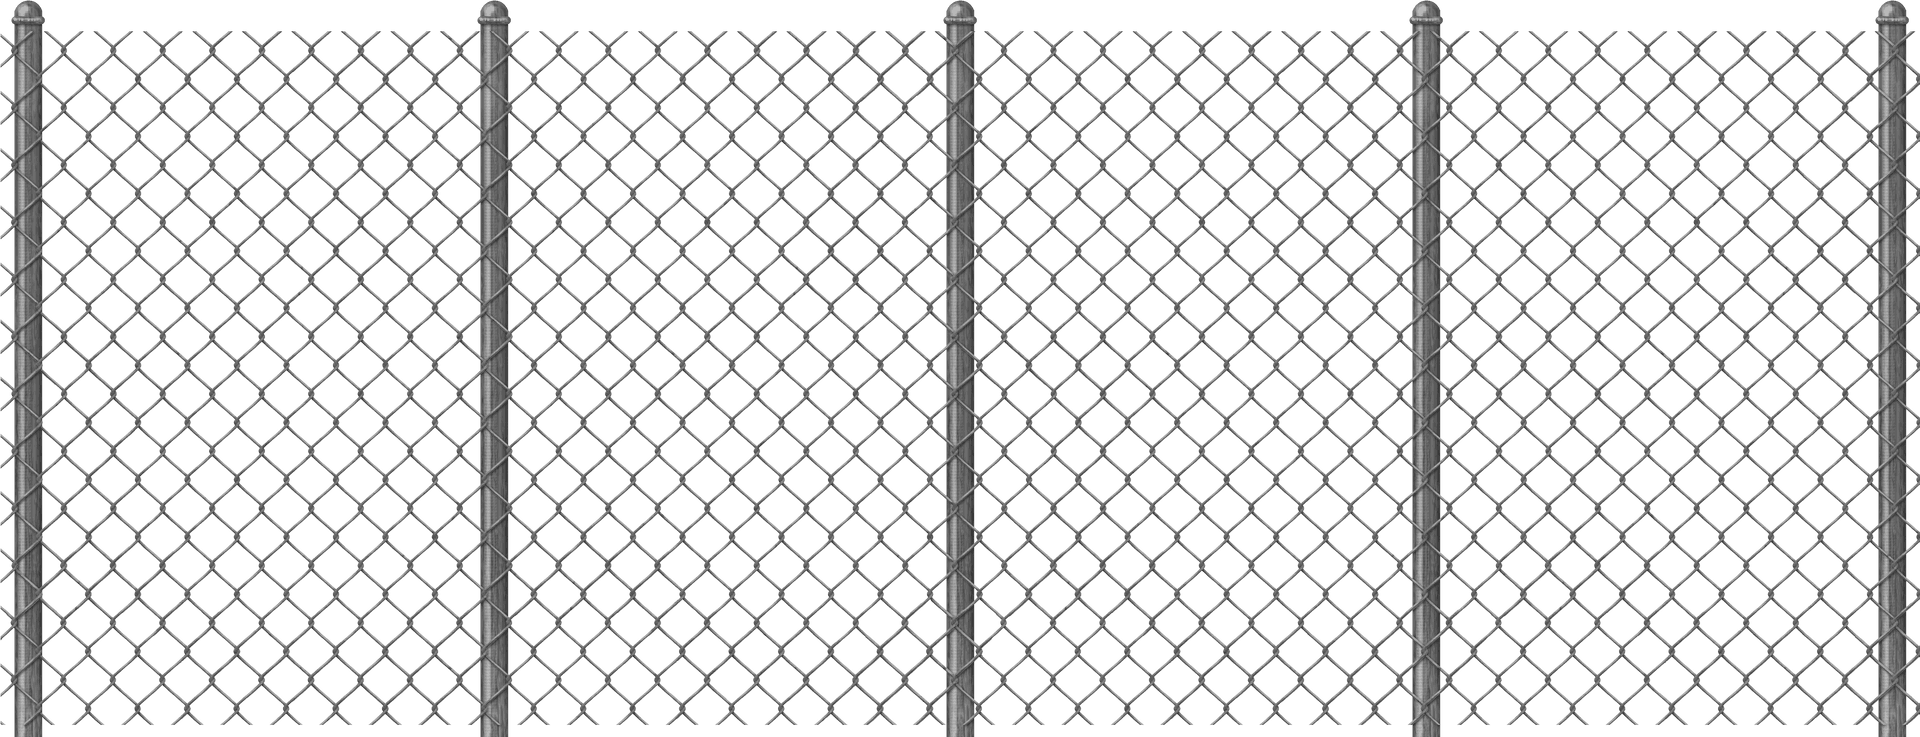 Chain Link Fence Png